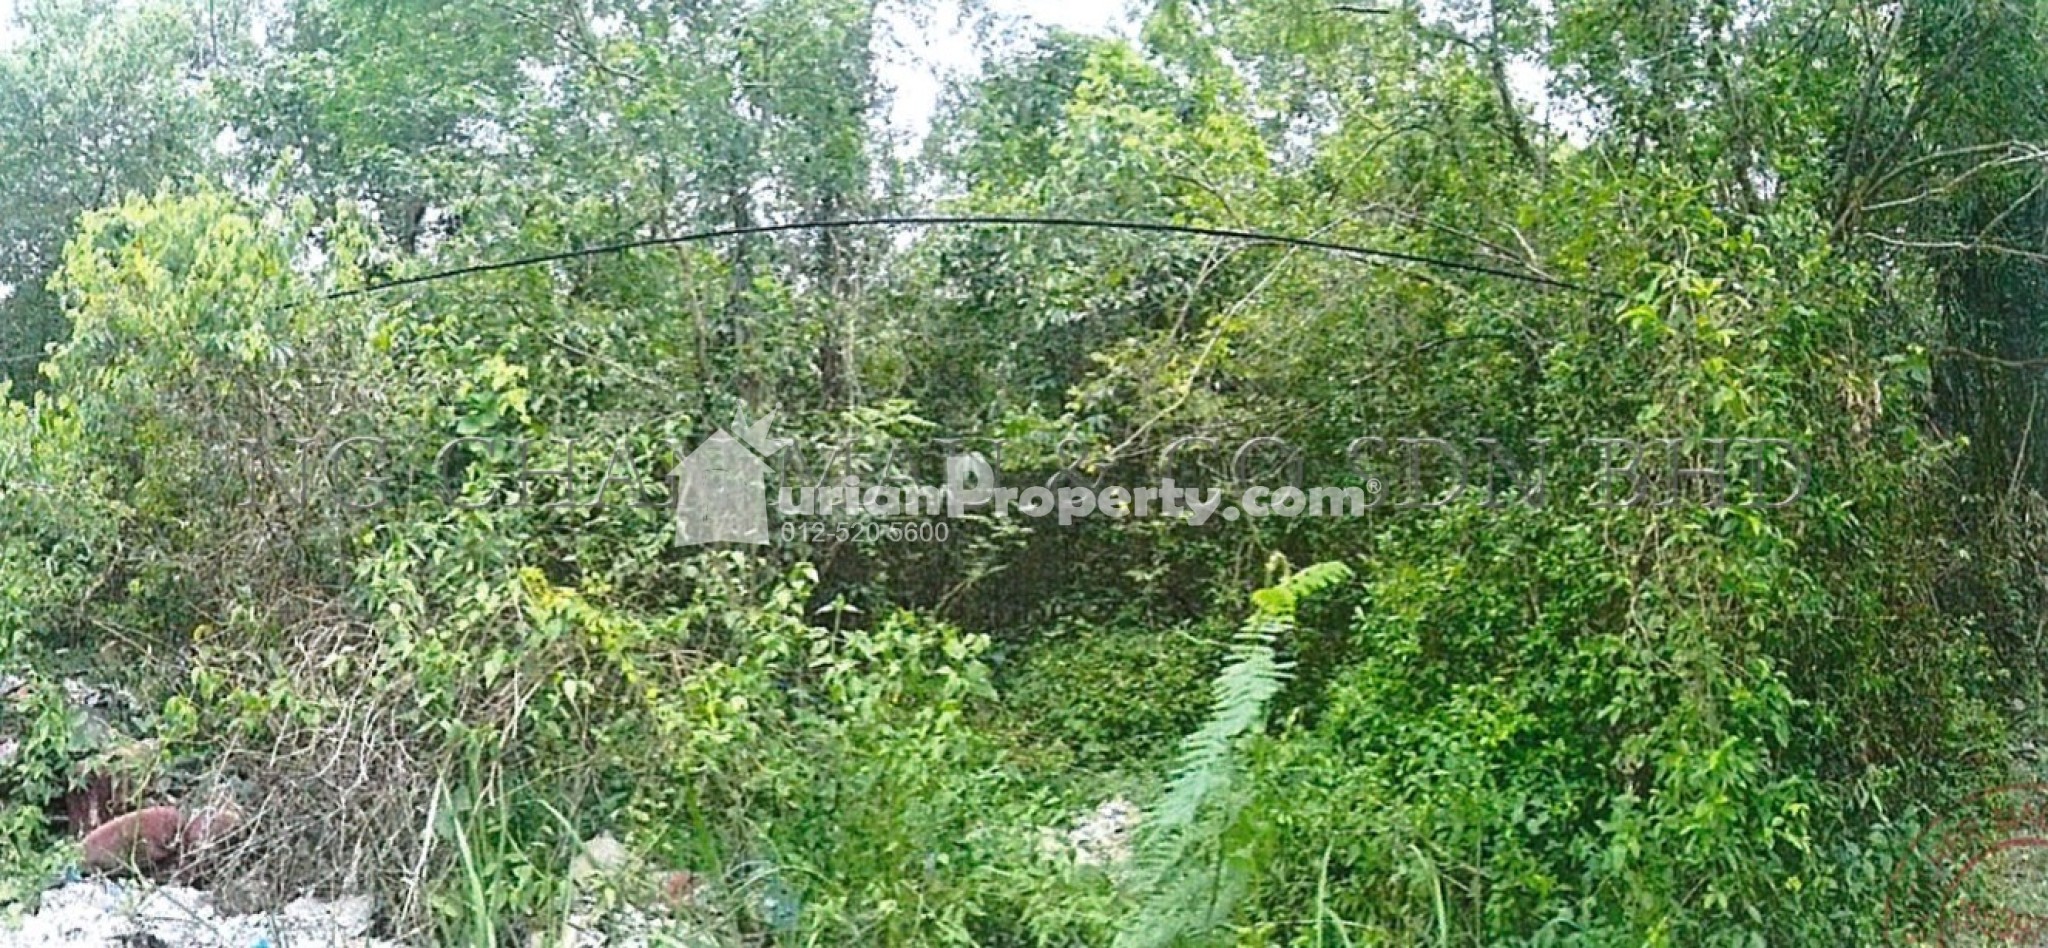 Residential Land For Auction at Rompin